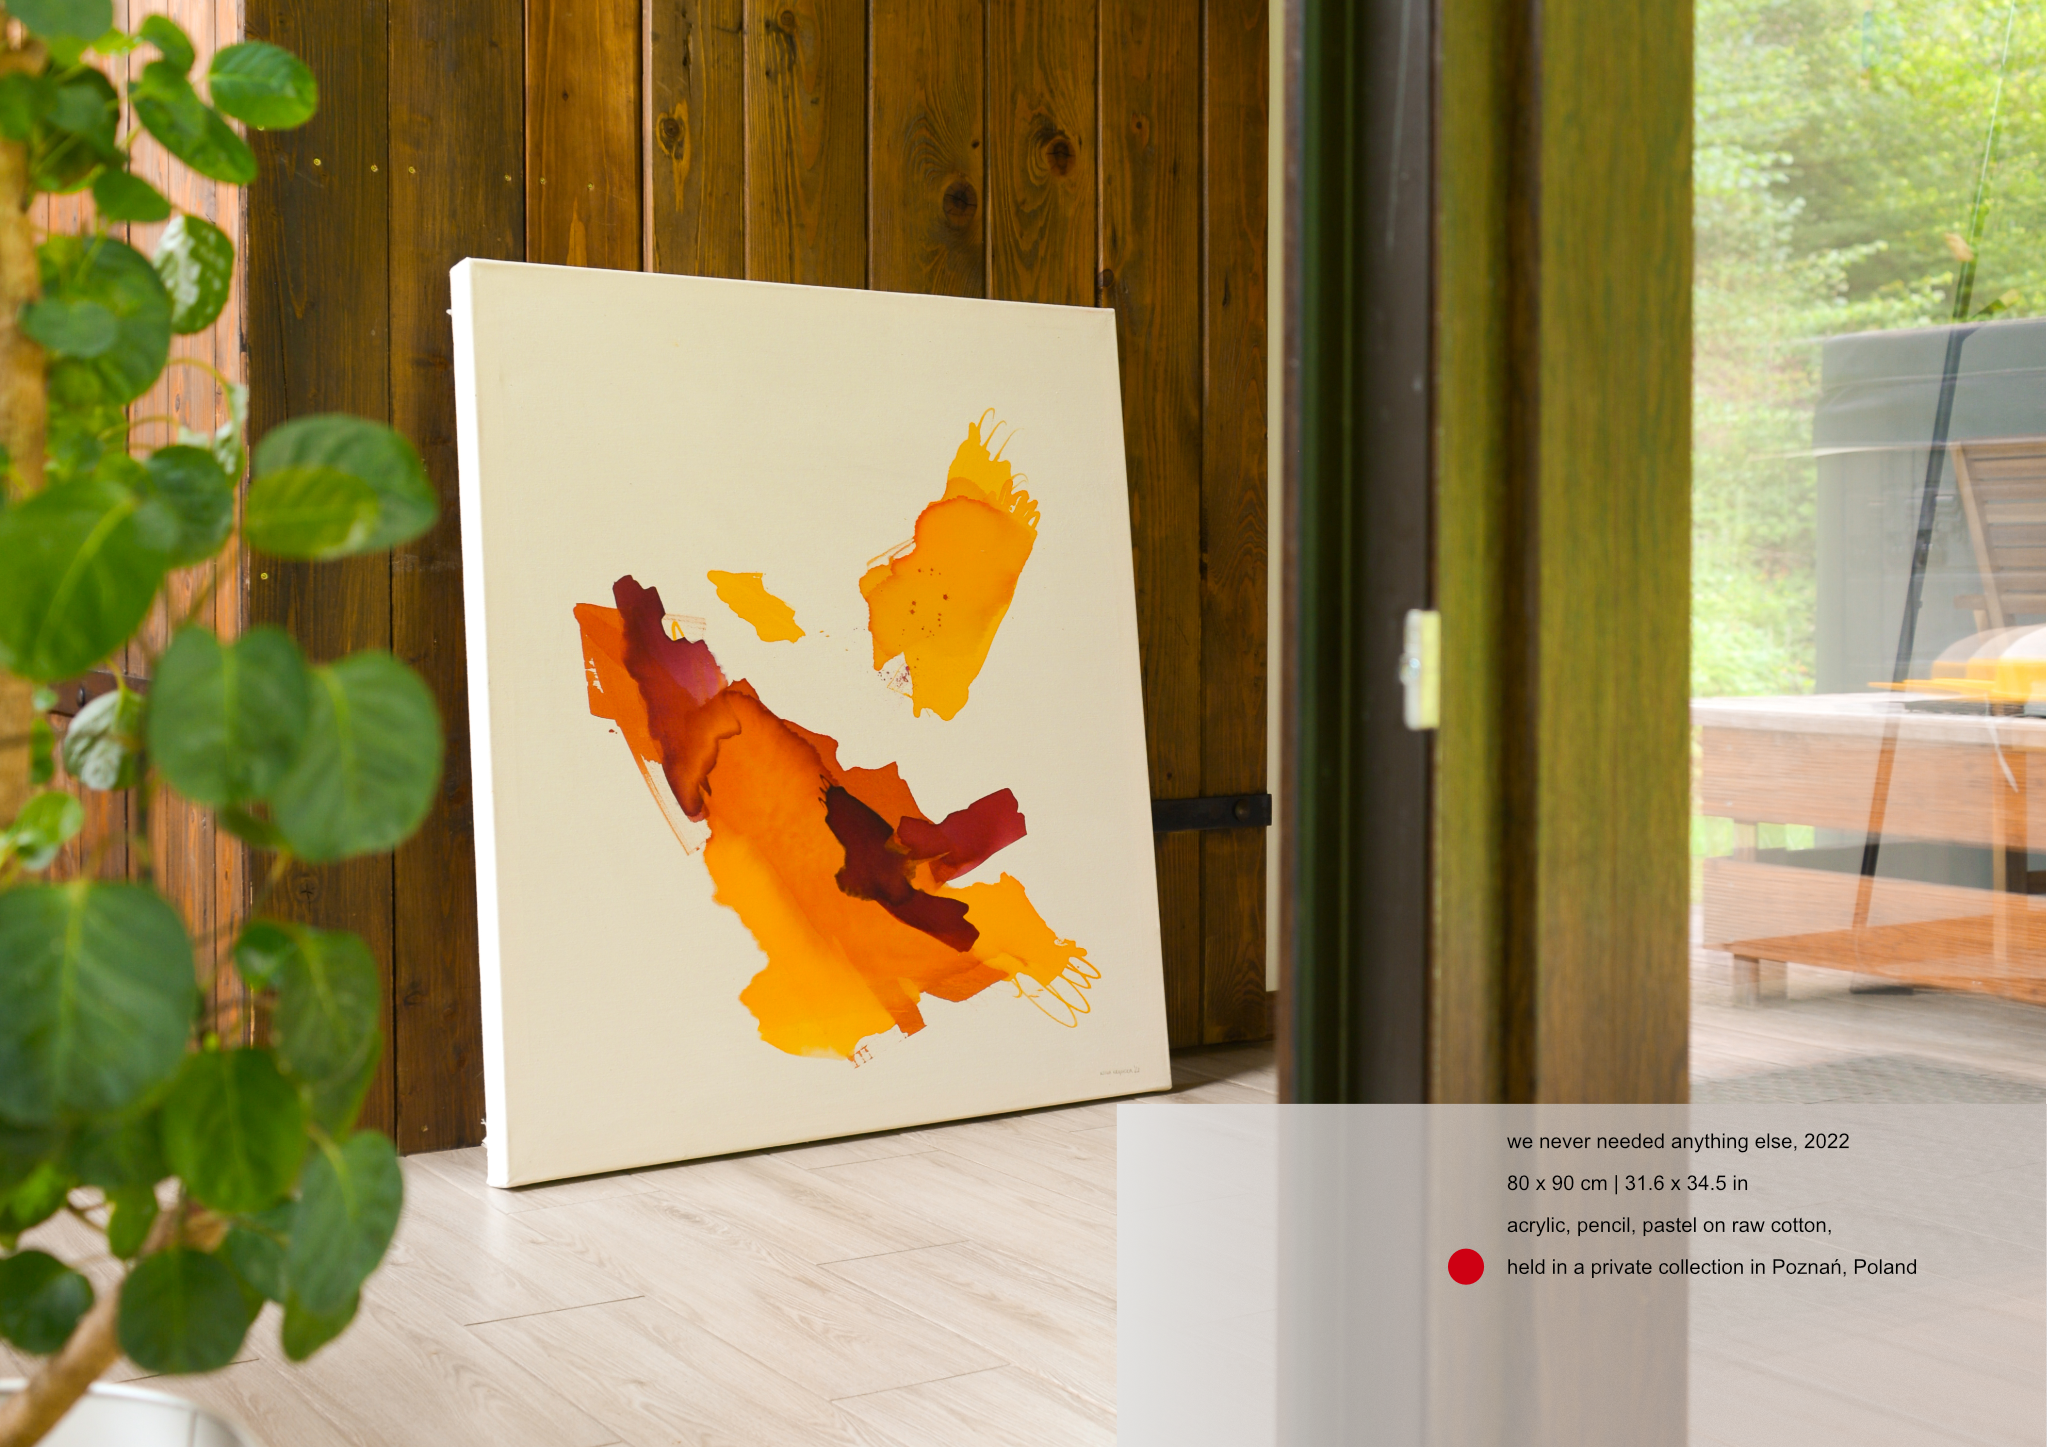 abstract painting situated in modern interior